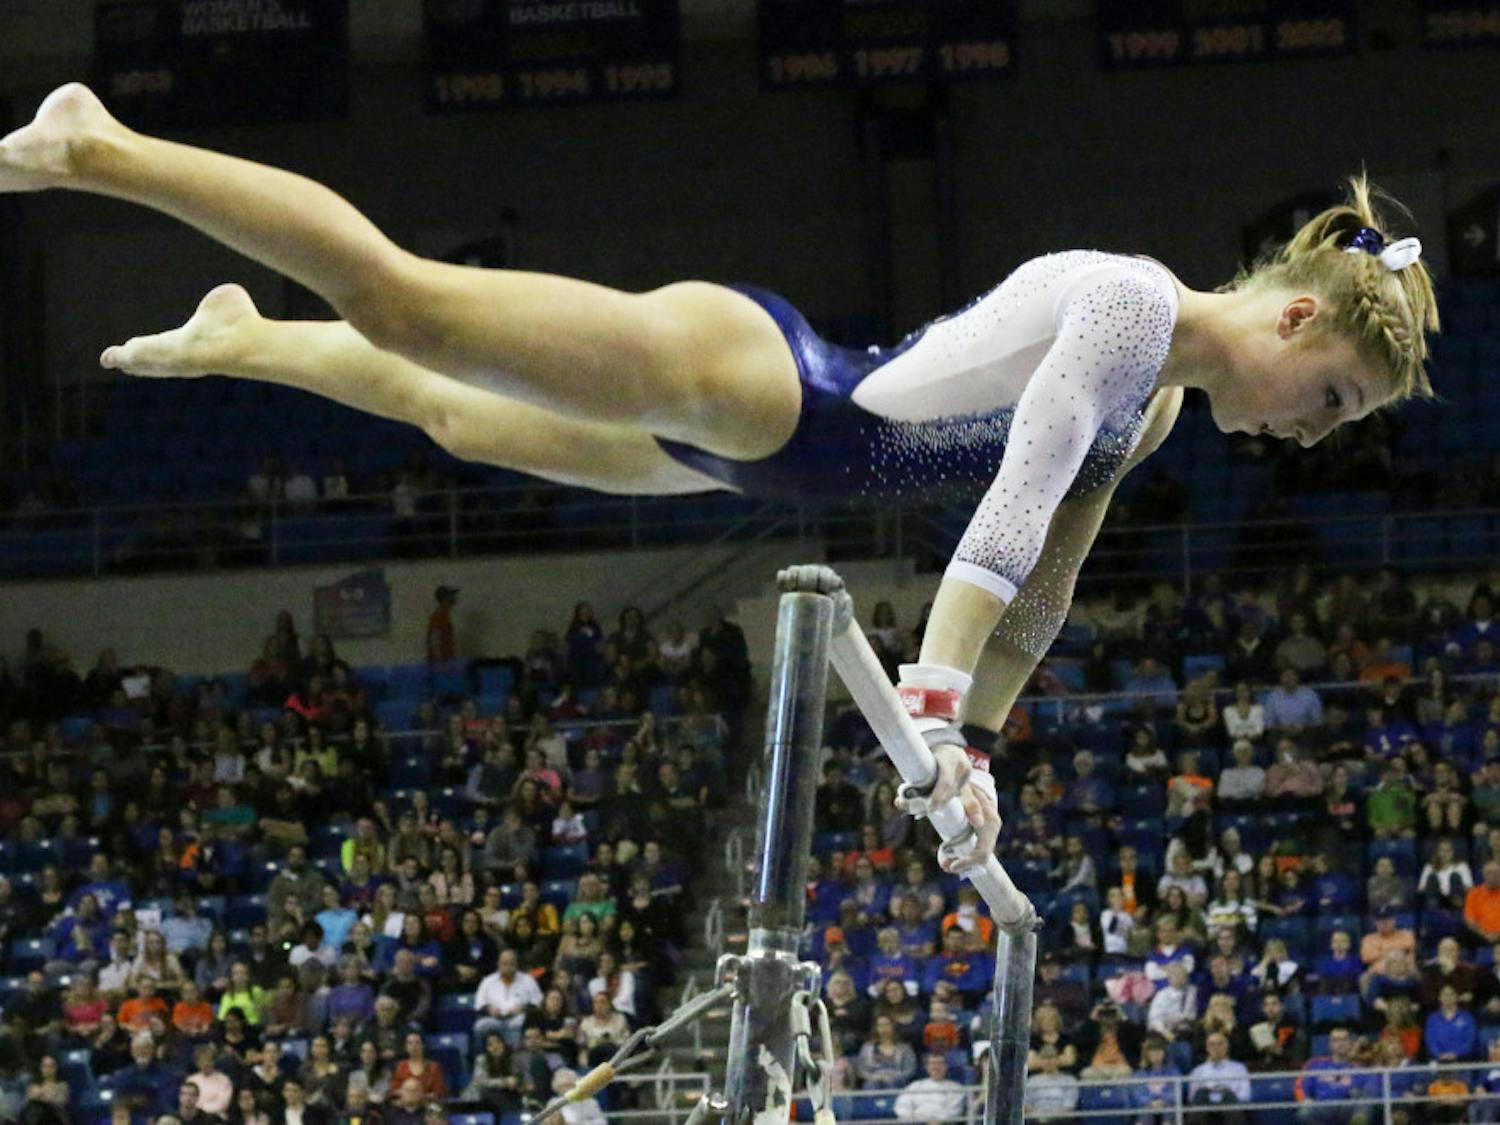 Freshman Alex McMurtry competes on the uneven parallel bars during Florida's win against Auburn on Friday in the O'Connell Center.